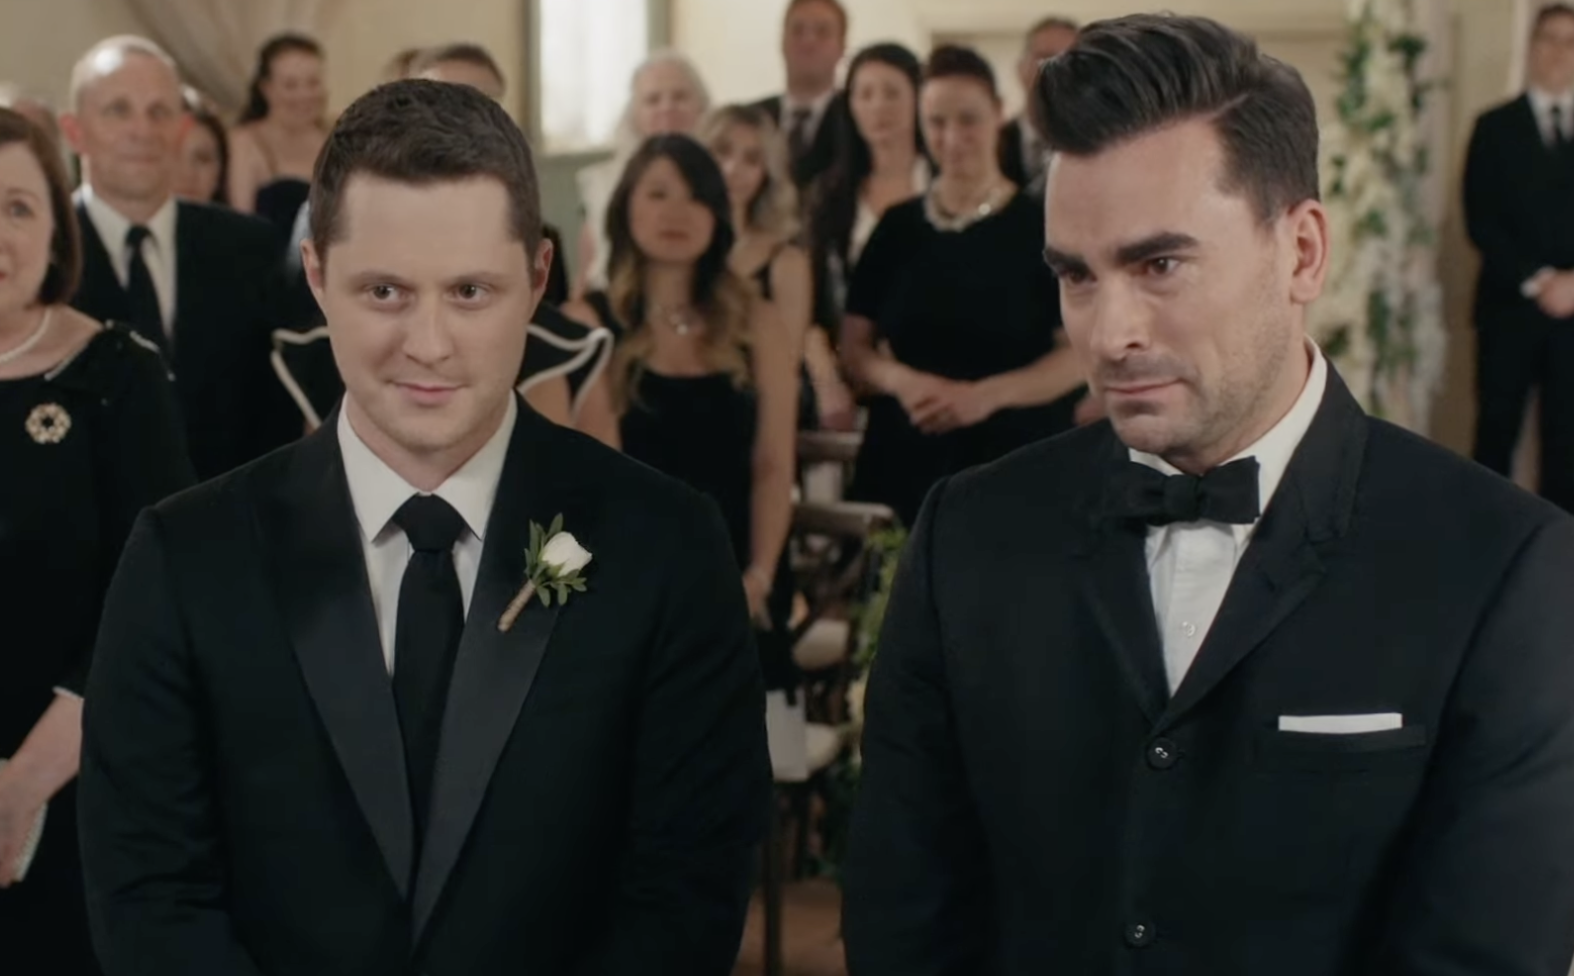 David and Patrick from Schitt&#x27;s Creek, wearing black suits and standing at the front of a room with a crowd of people standing behind them